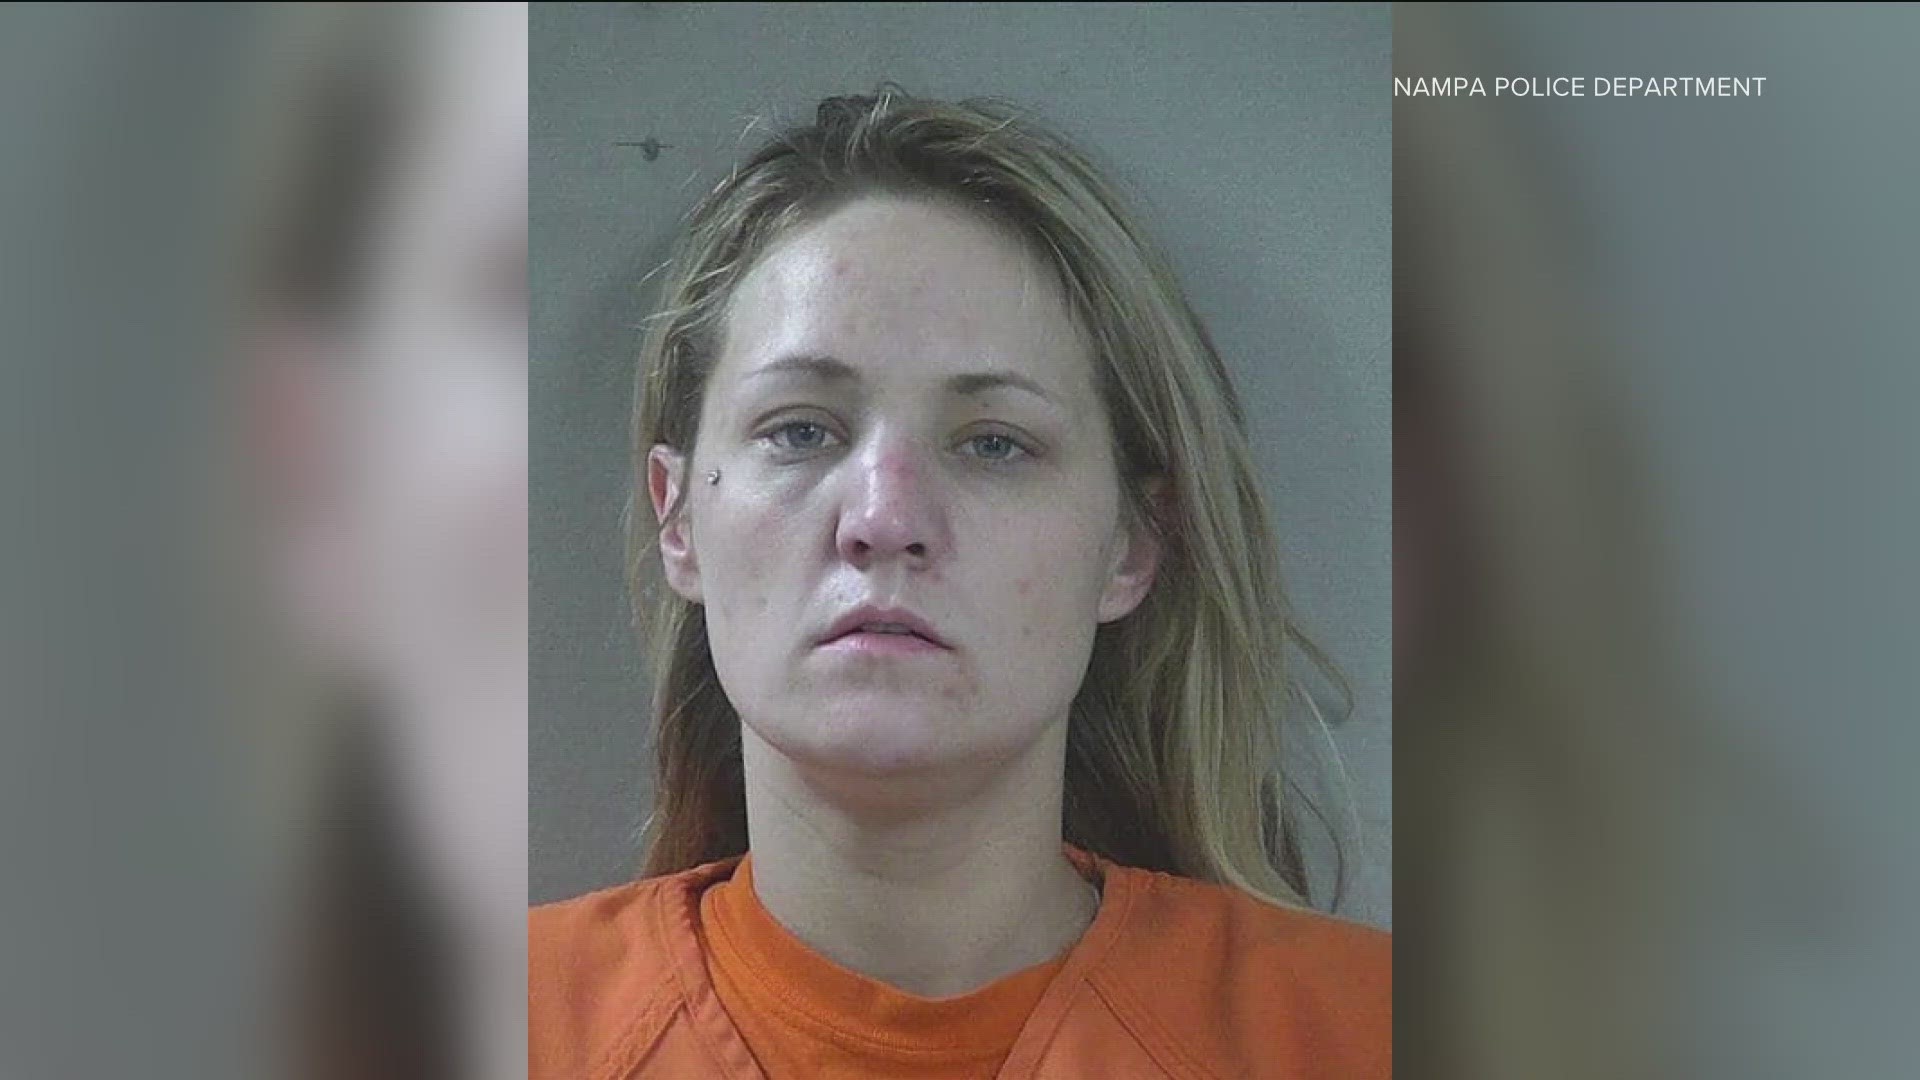 The Nampa Police Department said the woman drove away Monday afternoon in a car with no license plates while officers were confirming outstanding arrest warrants.